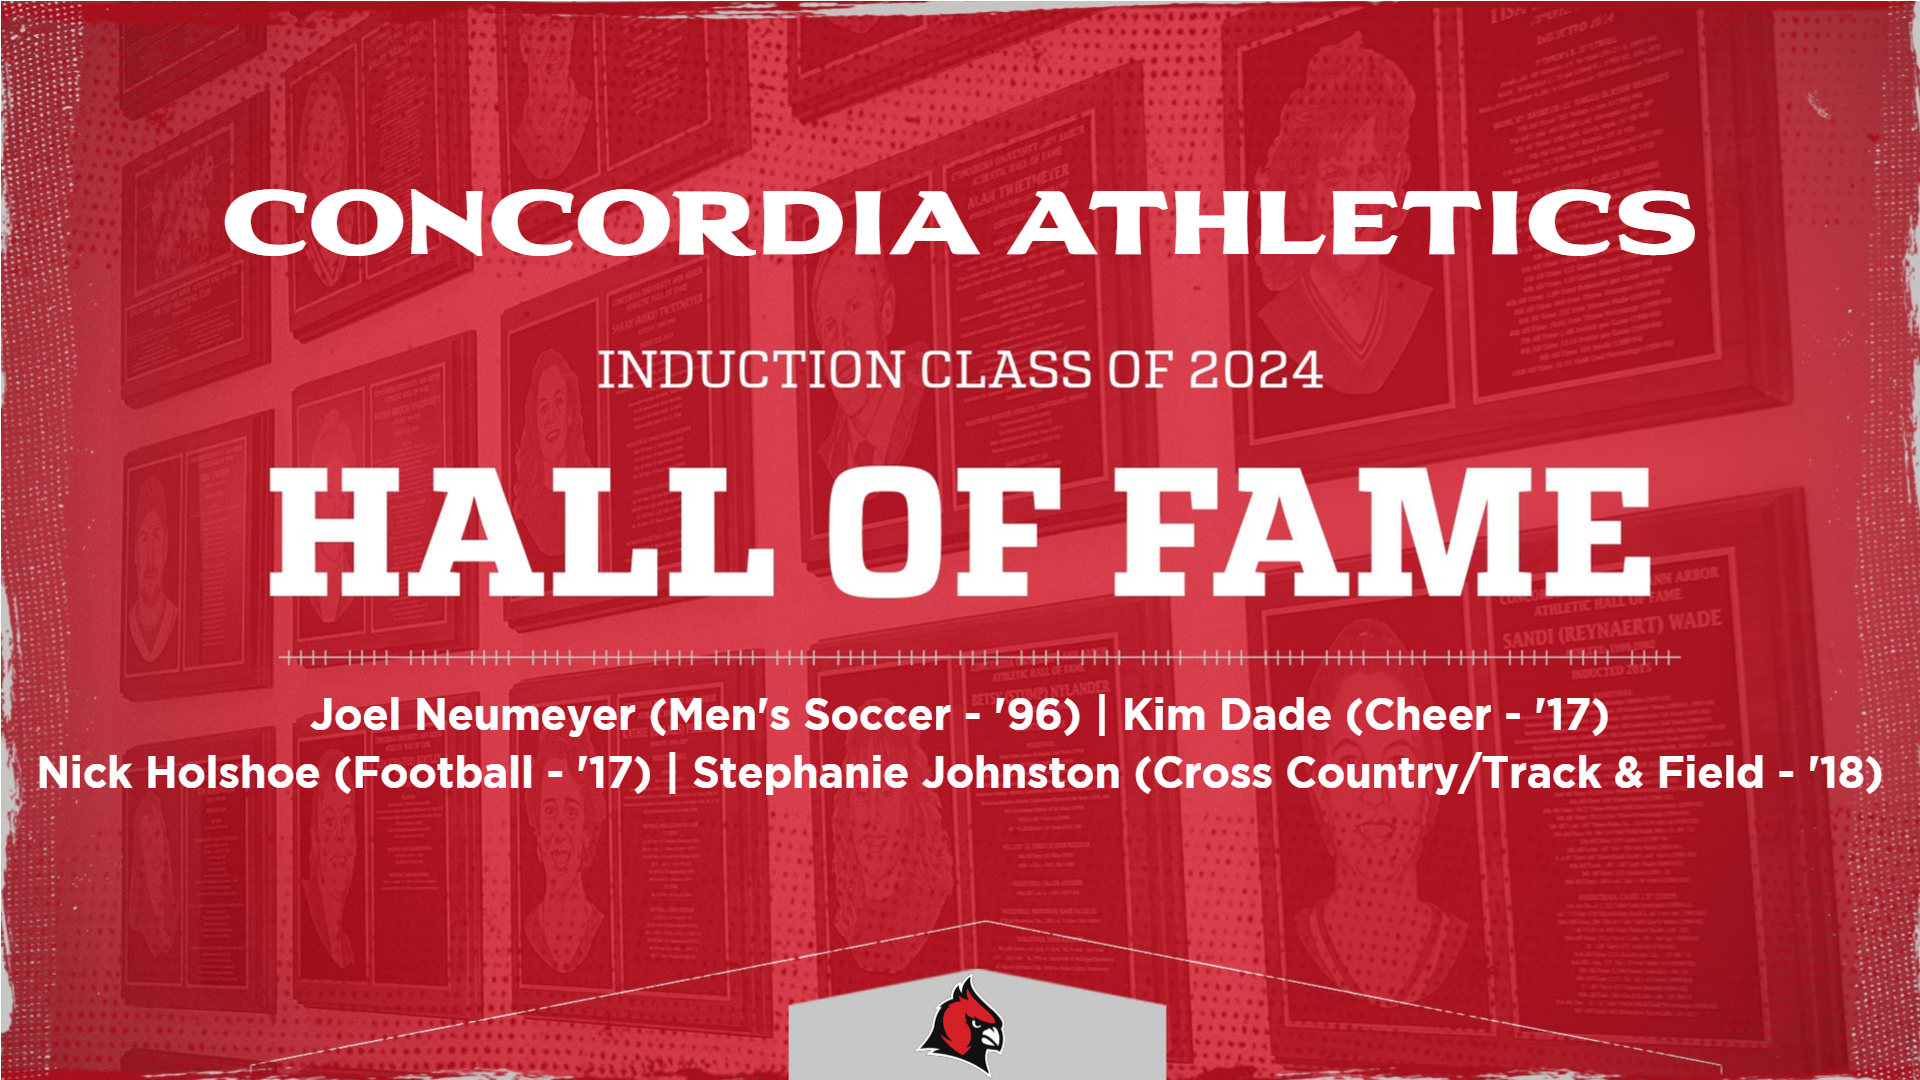 Concordia Athletics announces its 2024 Hall of Fame Class